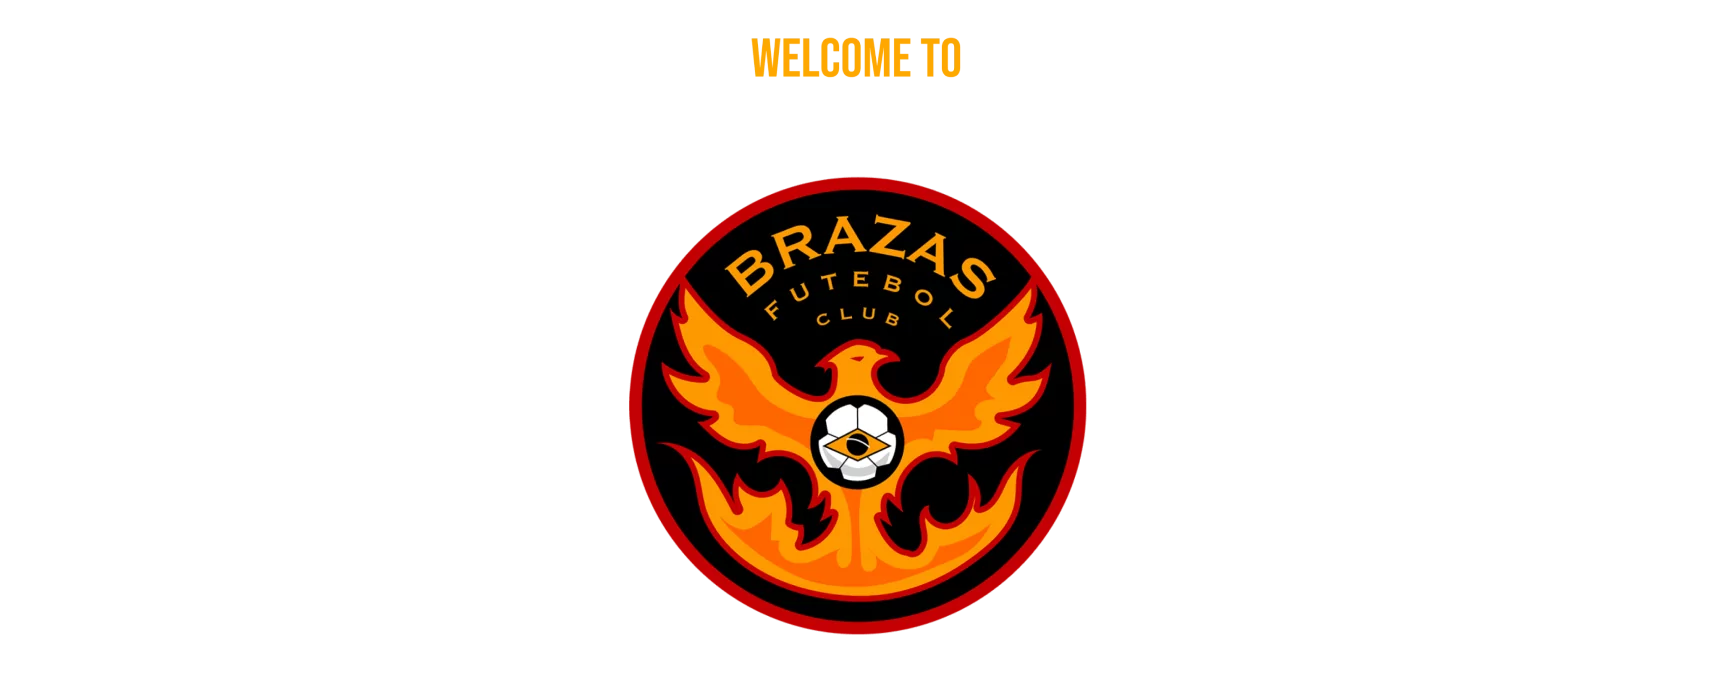 Welcome to Brazas FC